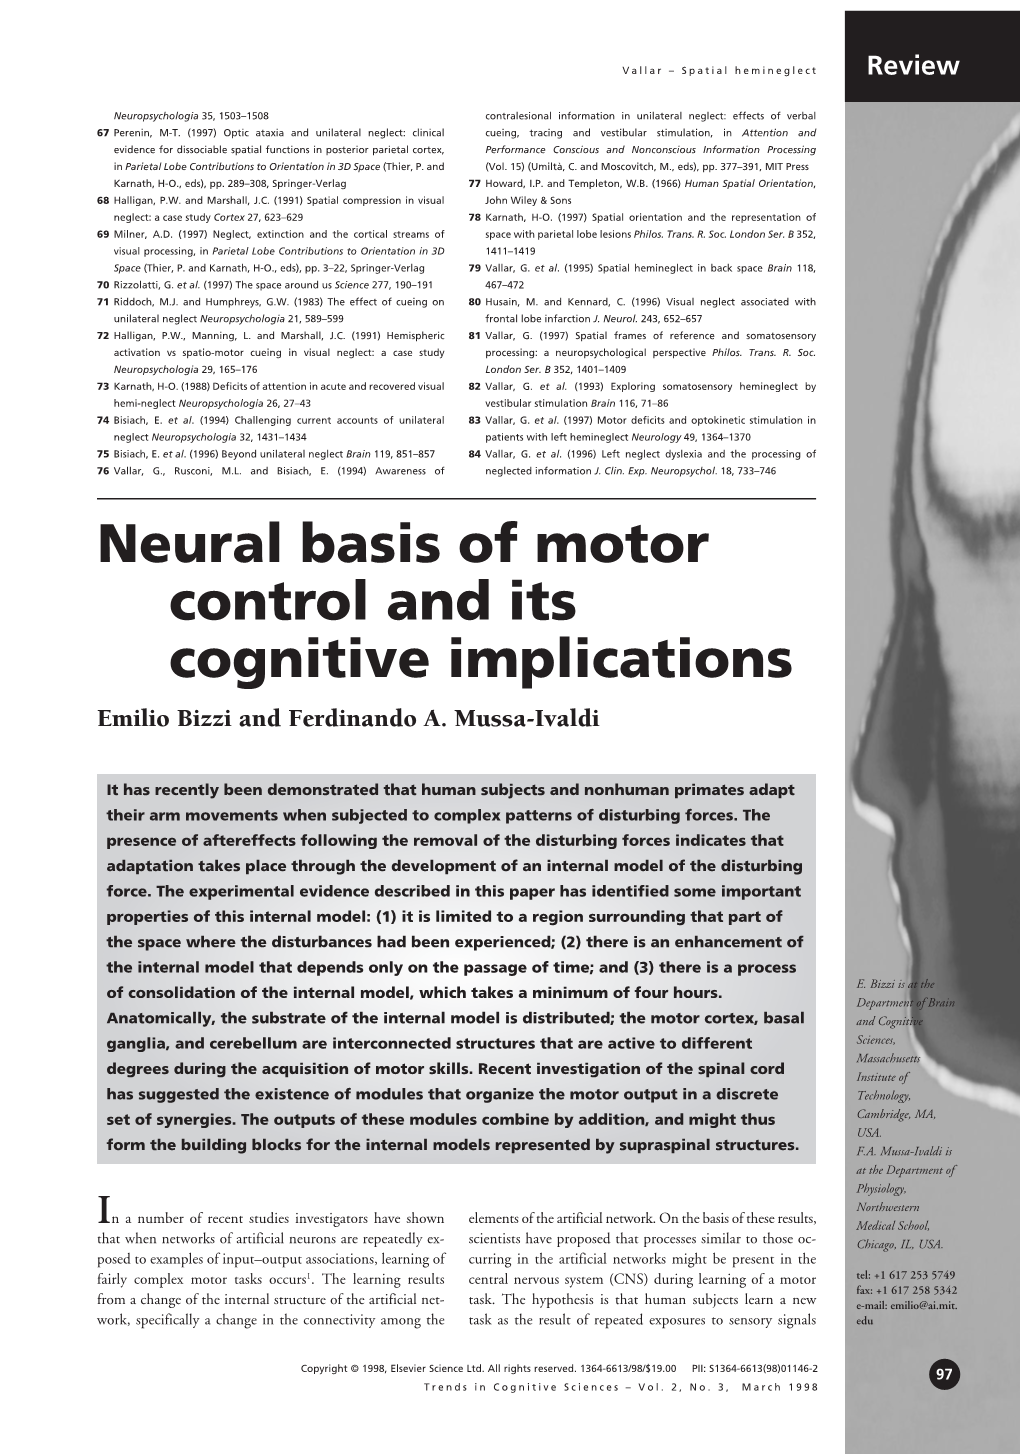 Neural Basis of Motor Control and Its Cognitive Implications Emilio Bizzi and Ferdinando A